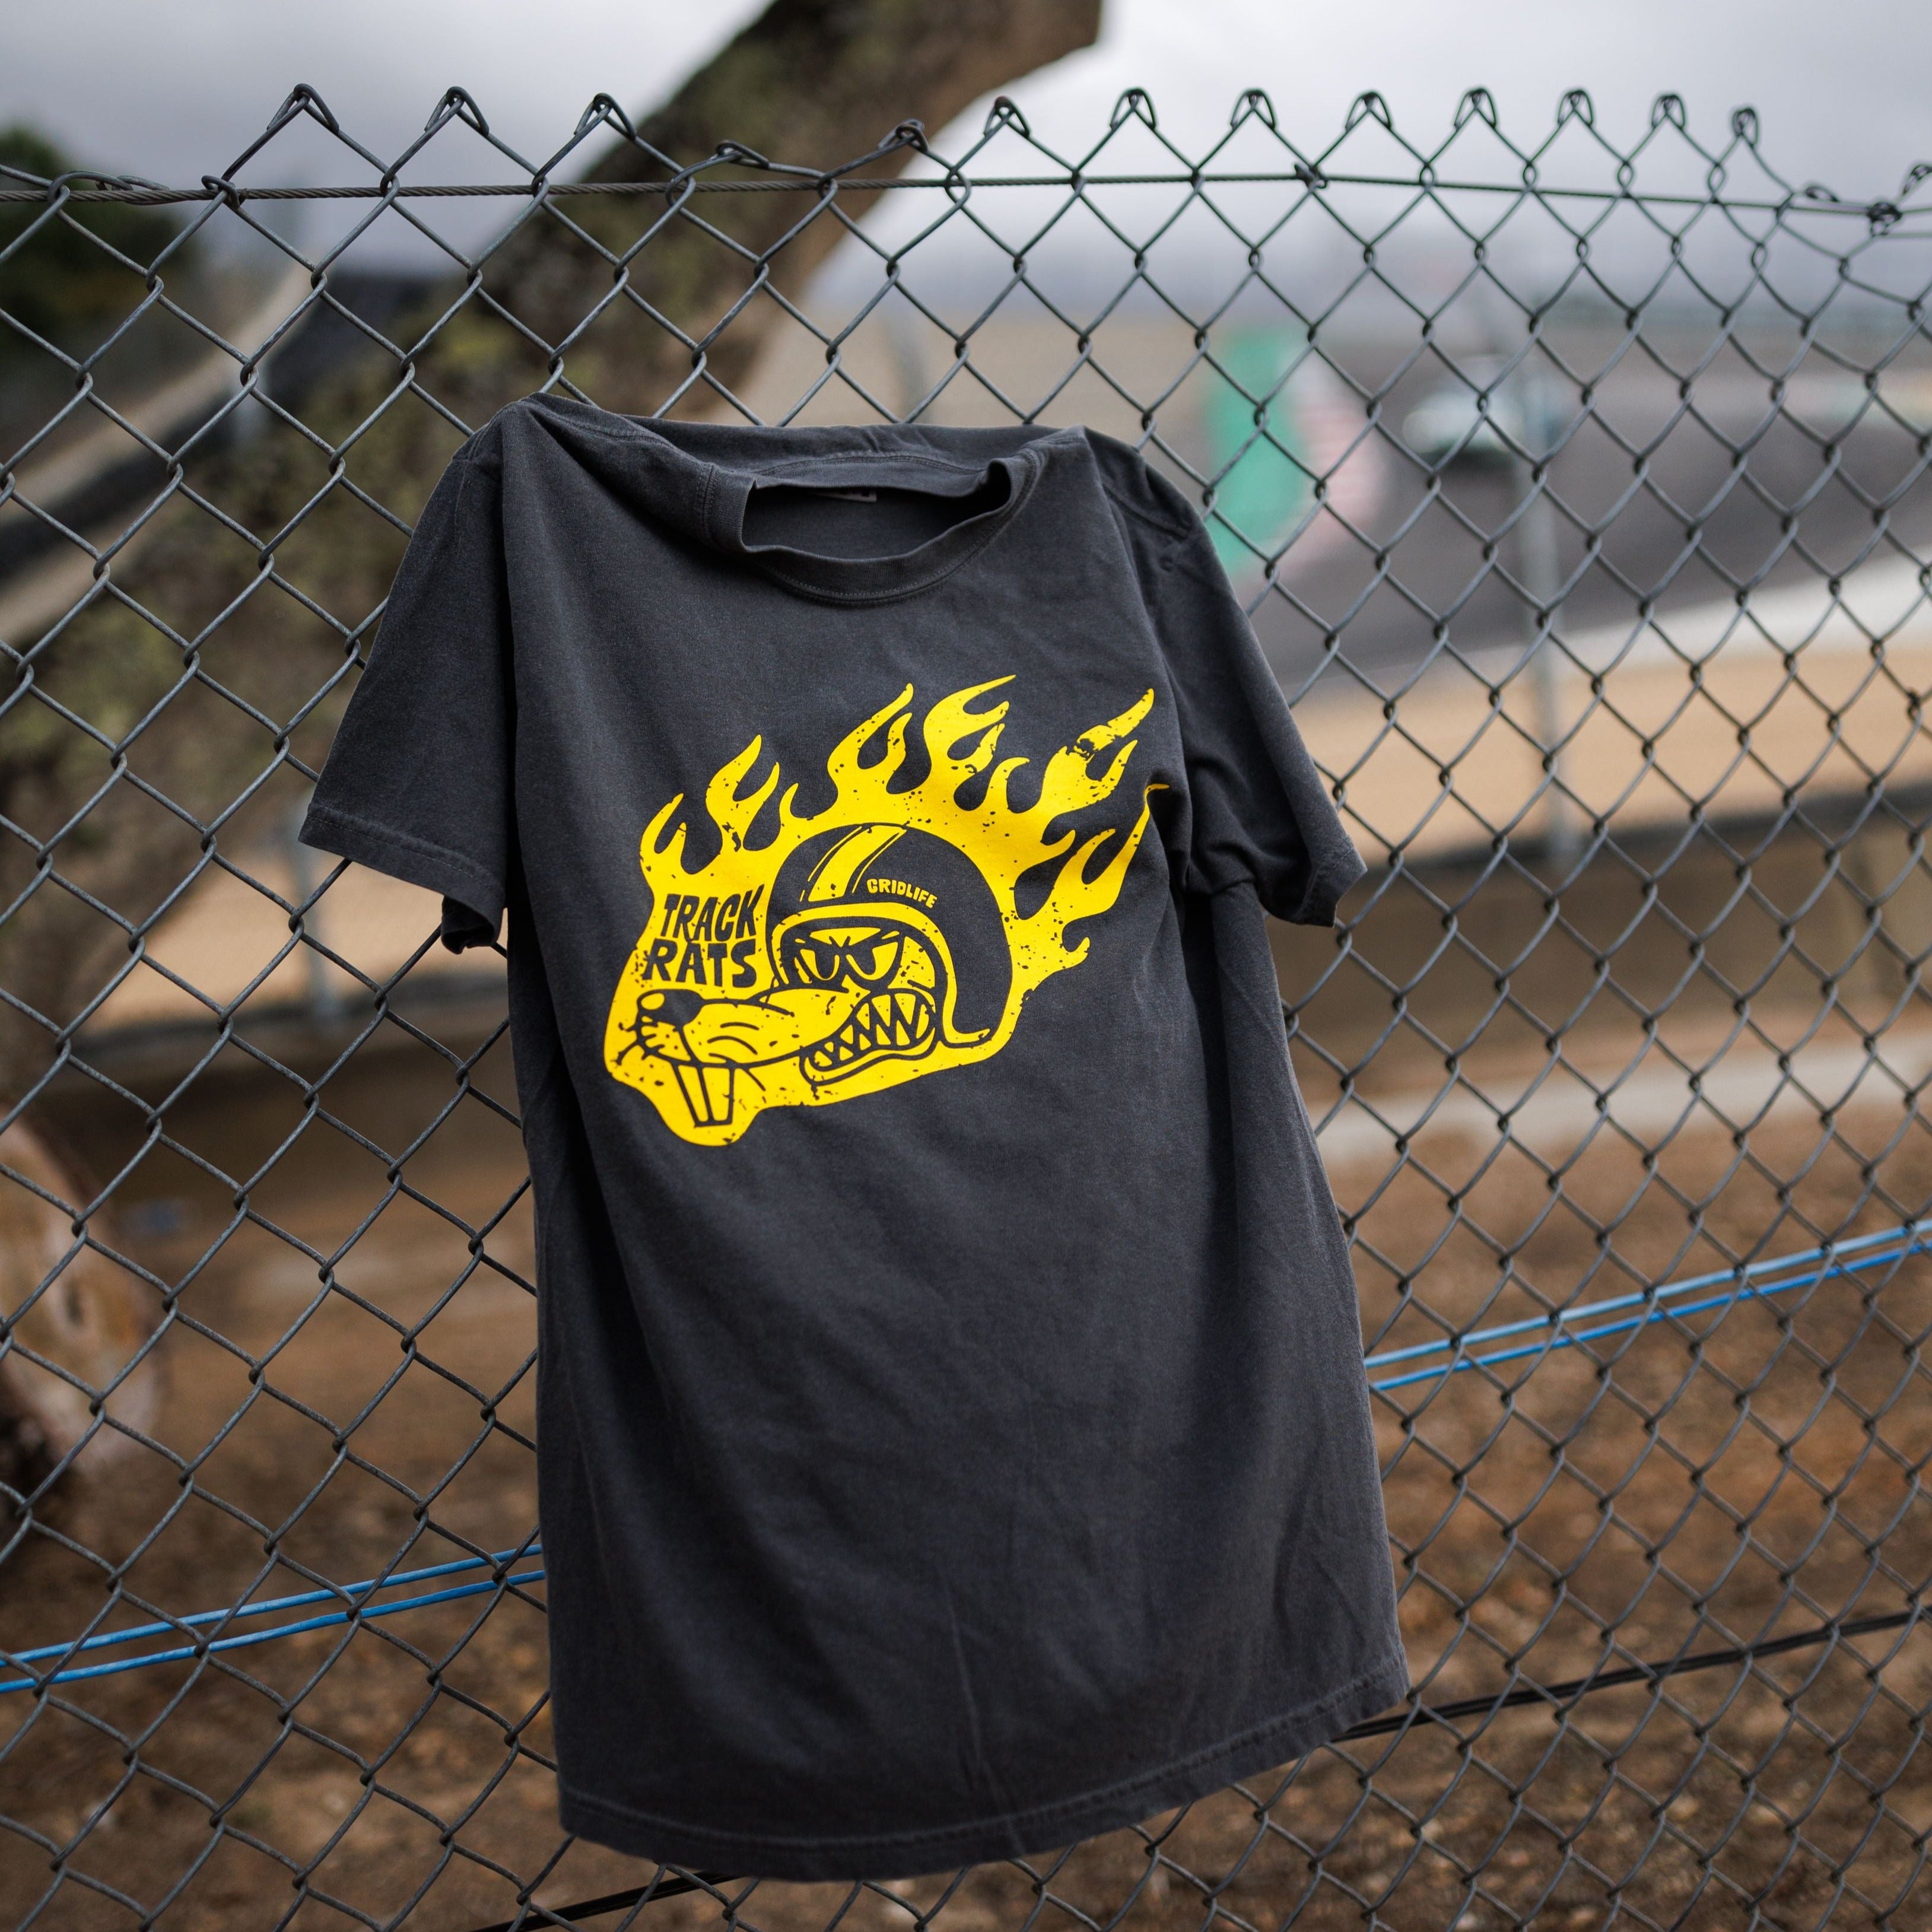 GRIDLIFE Track Rat t-shirt pinned to a fence